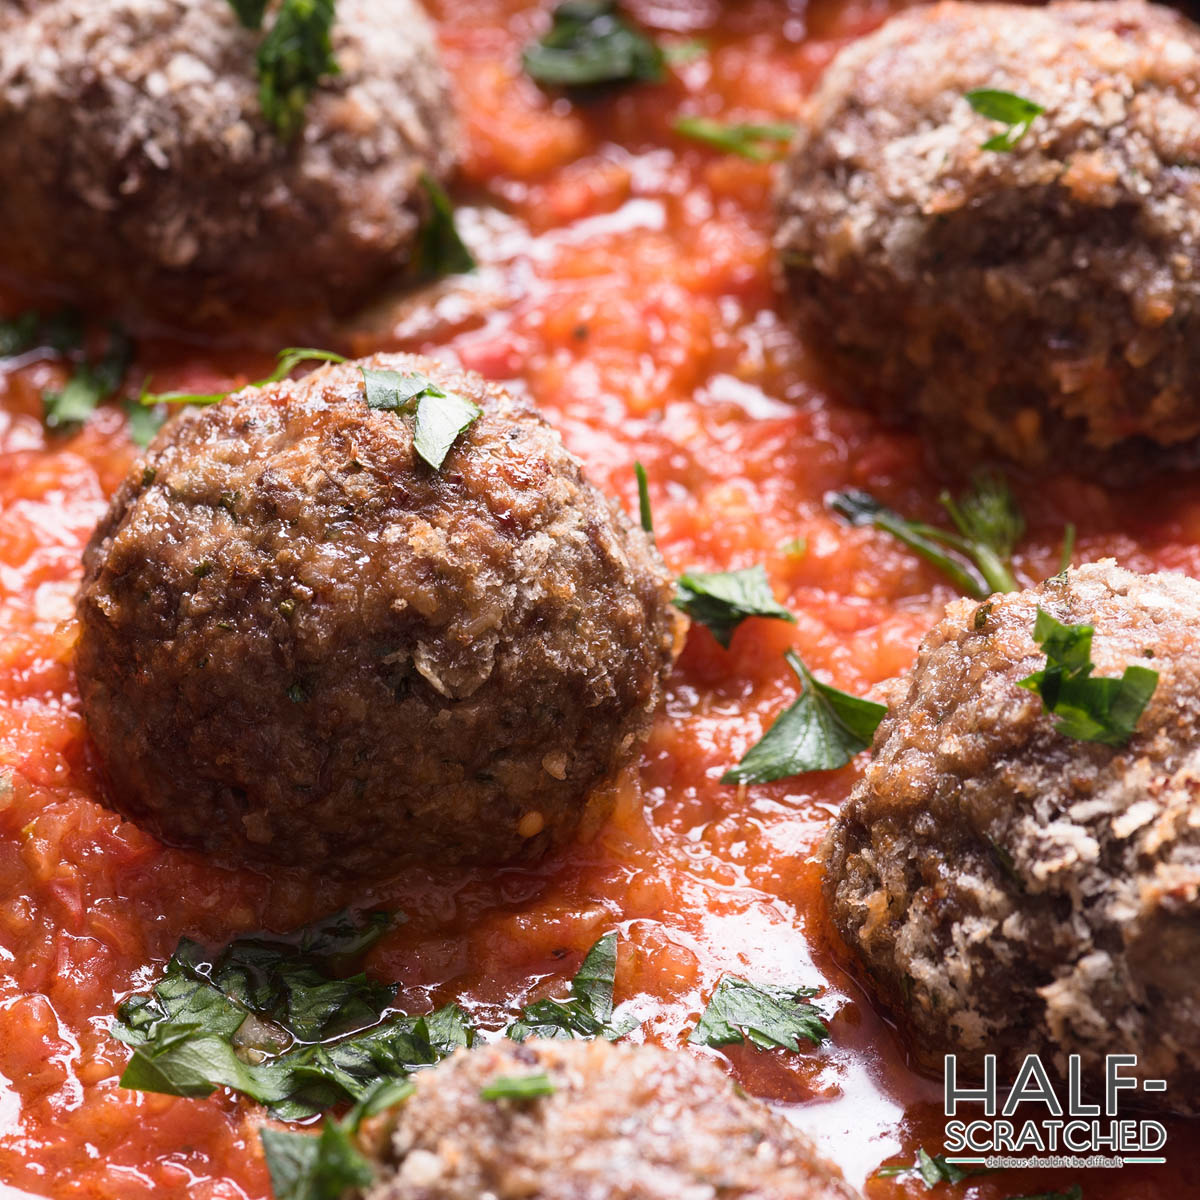 Meatballs in the oven at 400F with sauce